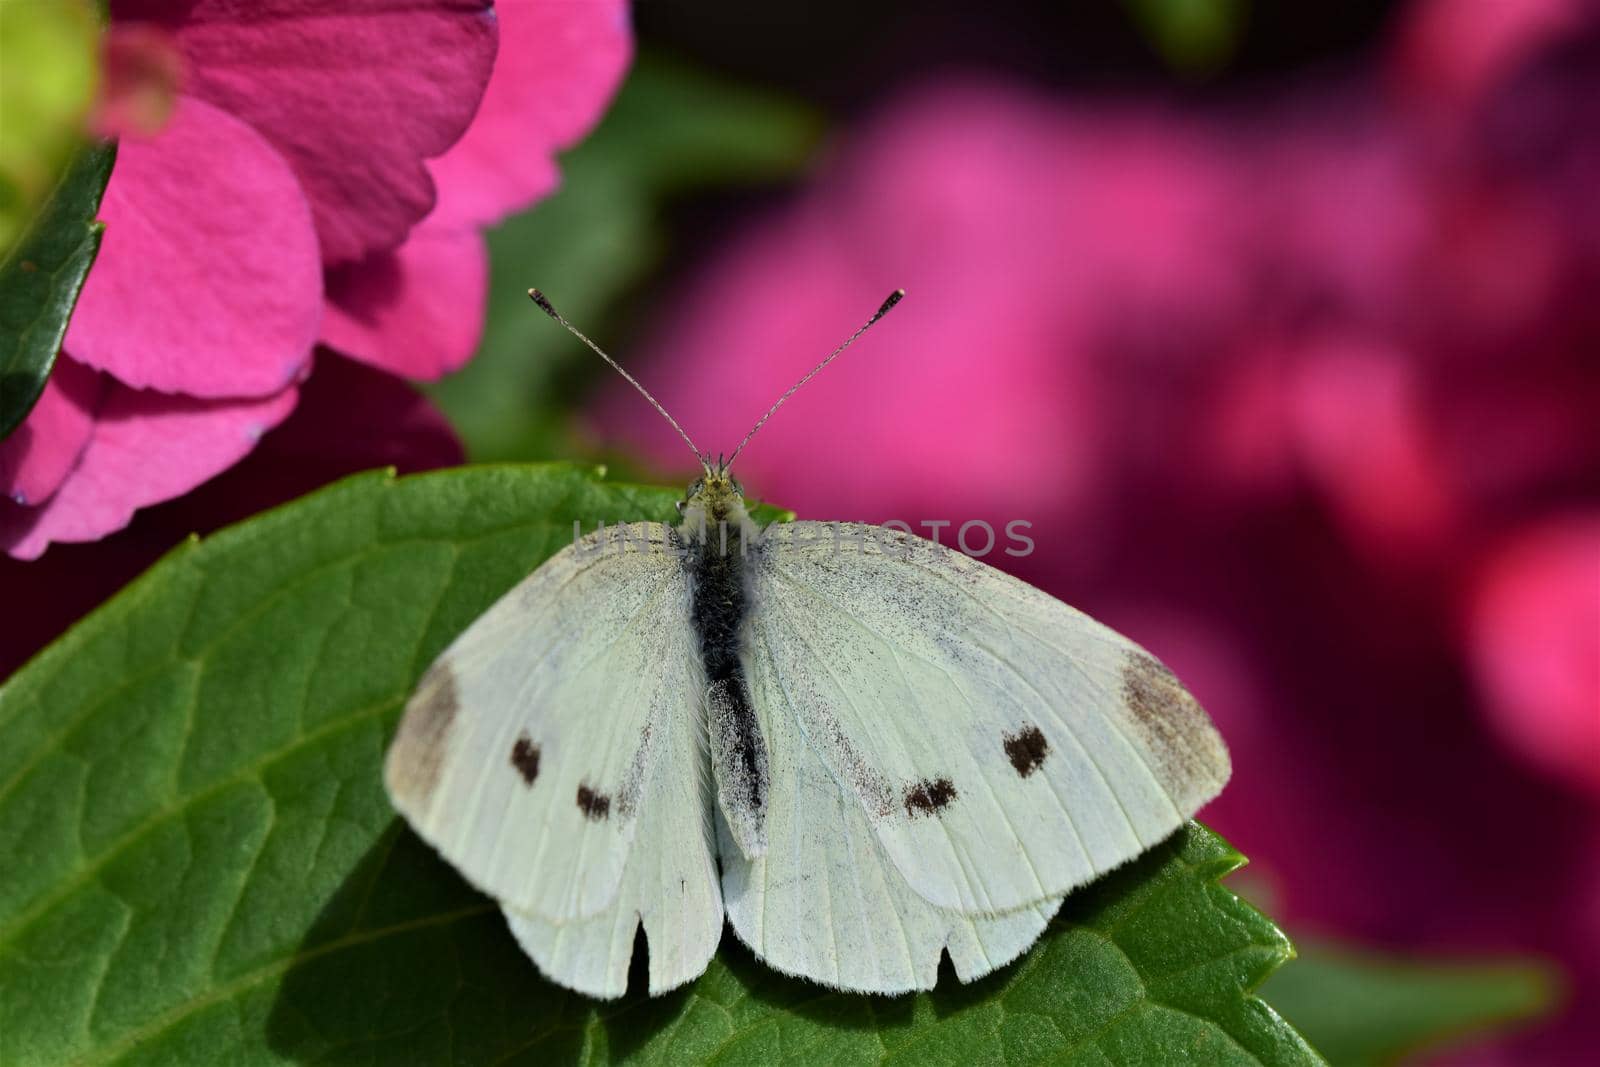 Pieris rapae - cabbage white butterfly at a pink hydrangea blossom as a close up by Luise123